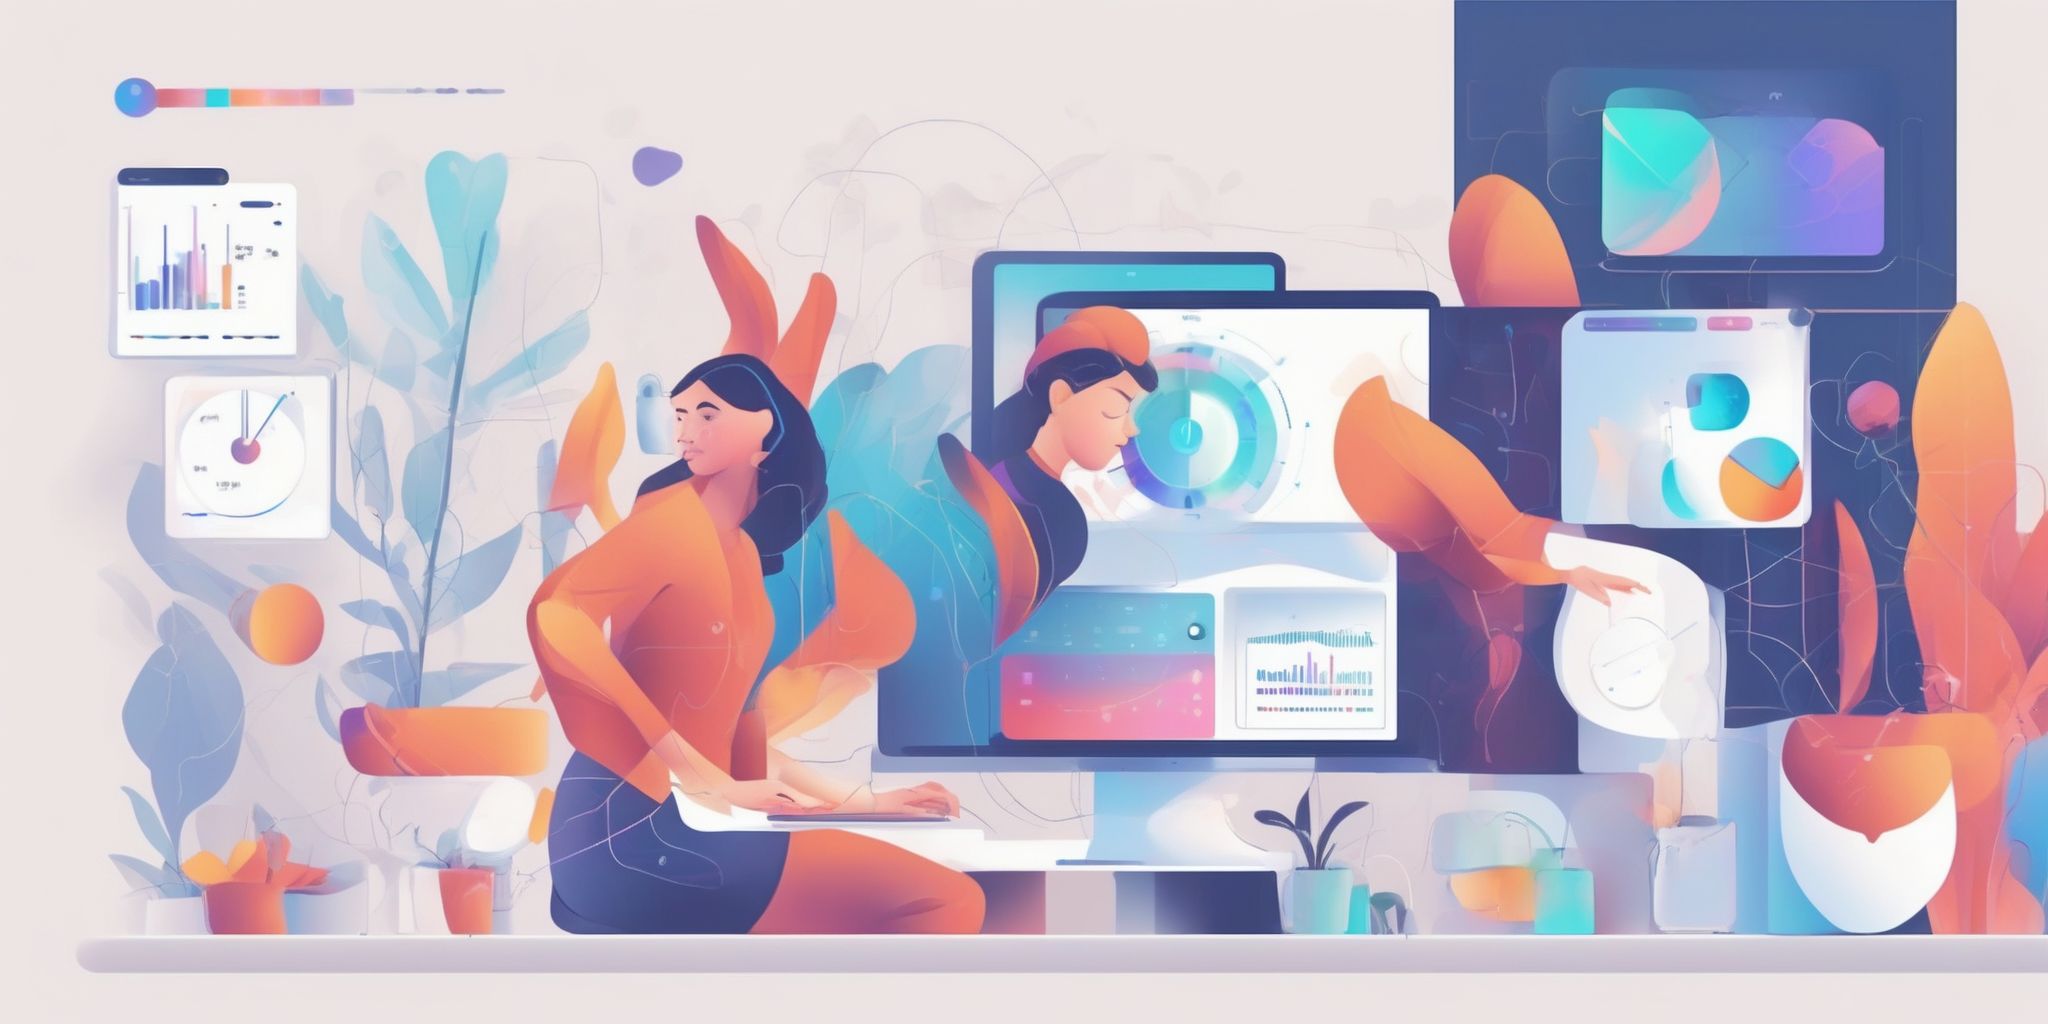 monitoring in illustration style with gradients and white background